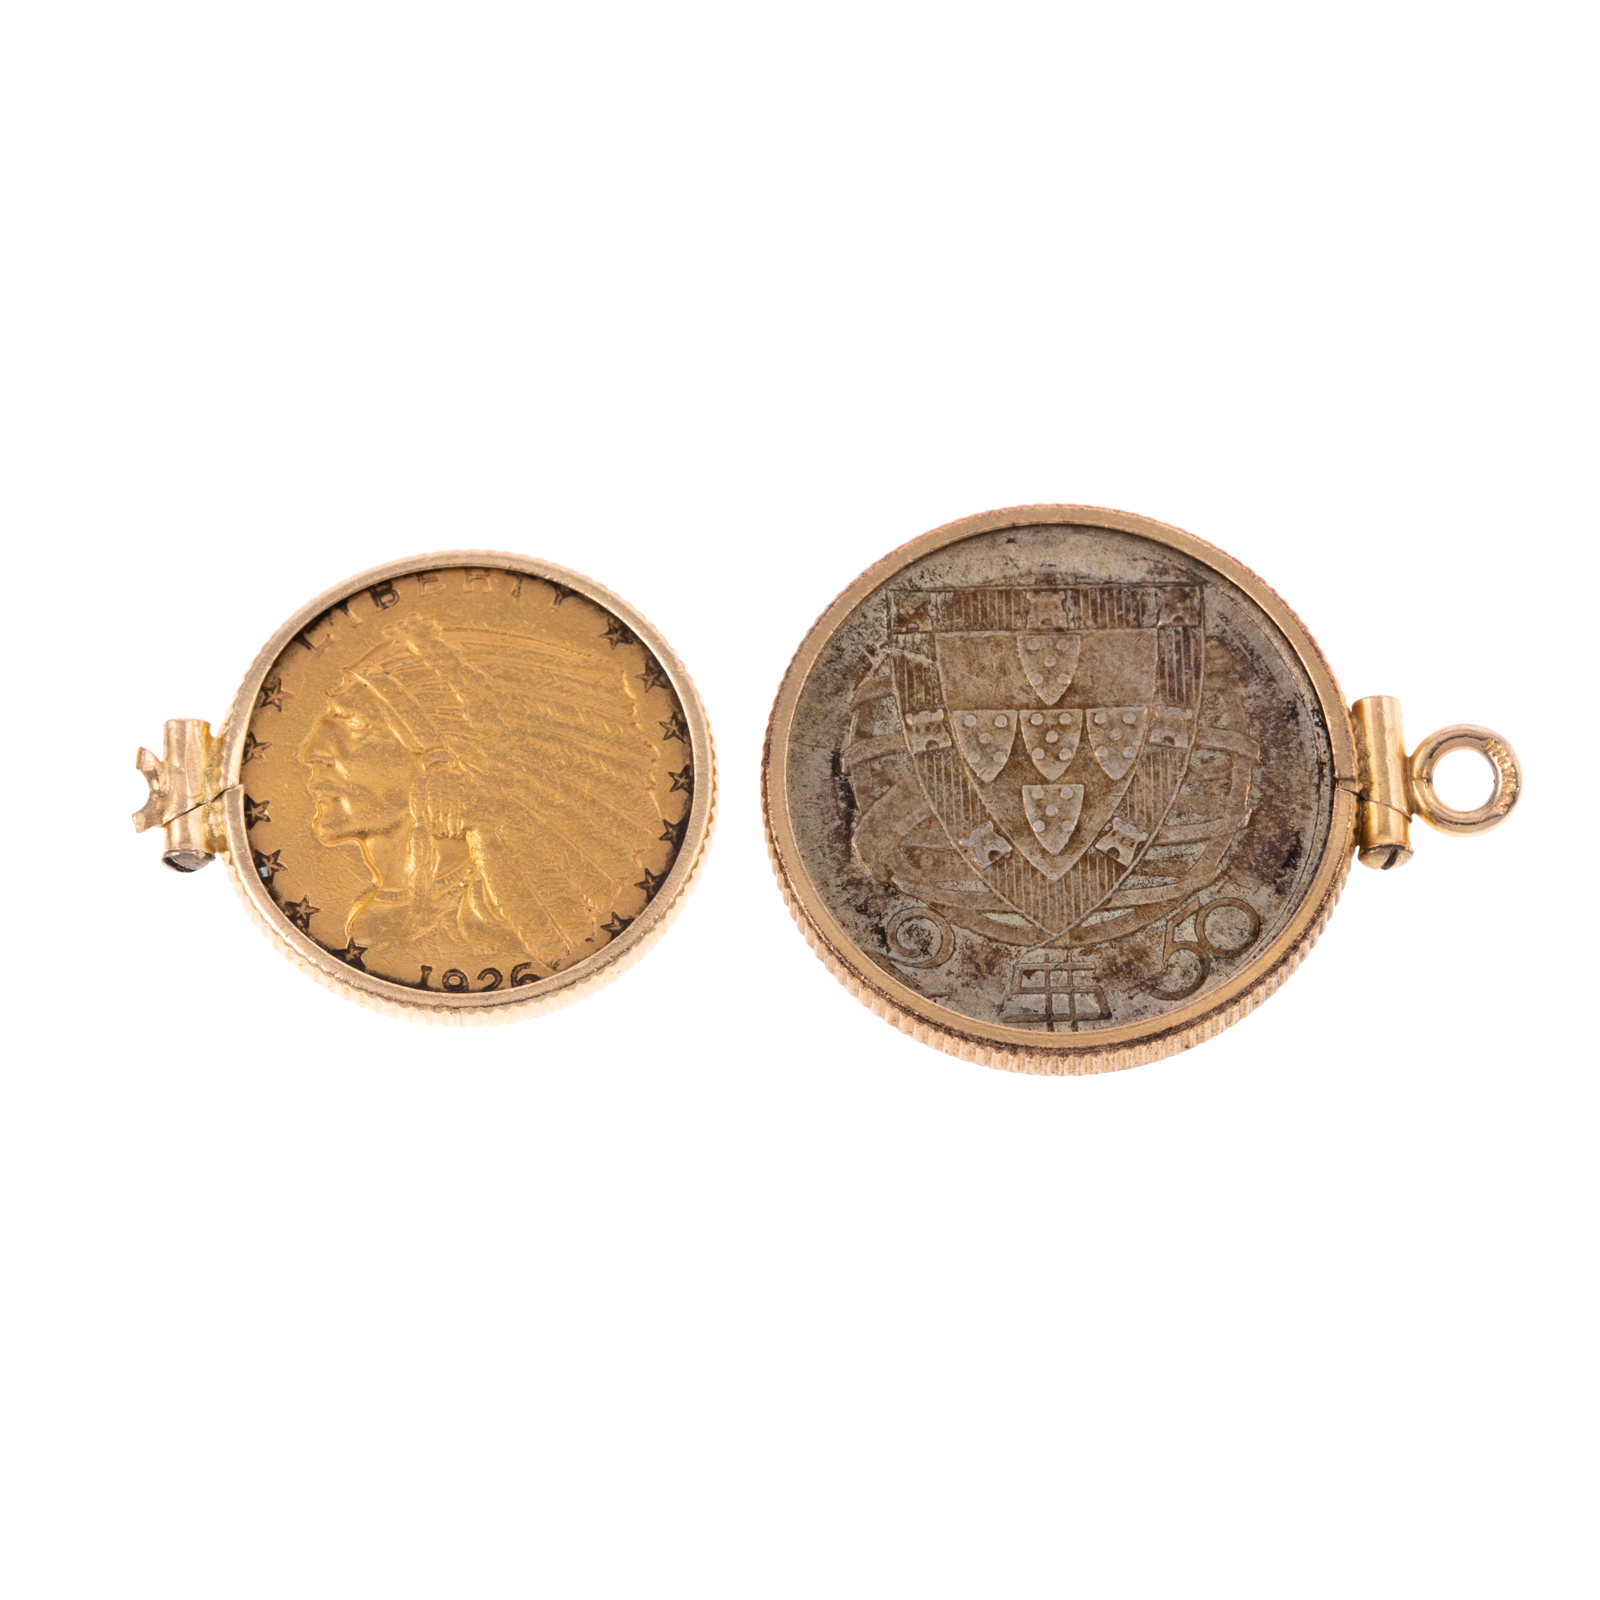 TWO VINTAGE COIN CHARMS/PENDANTS